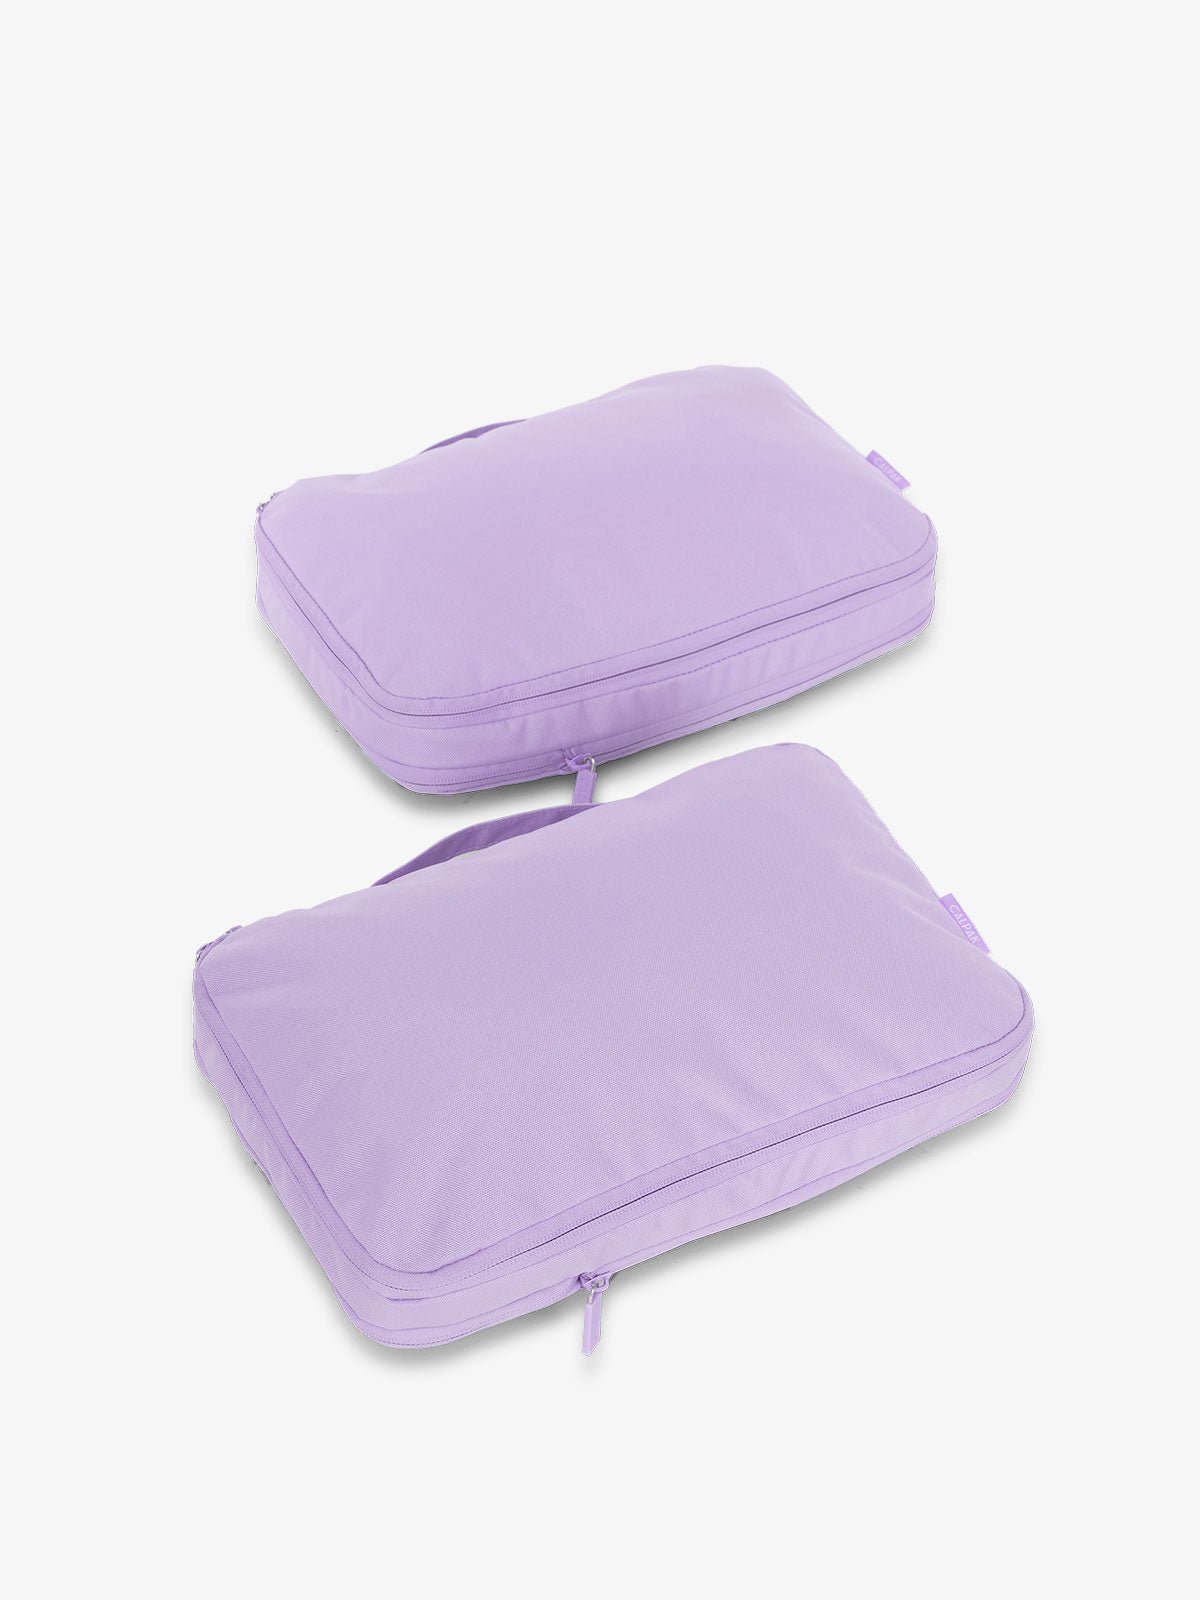 CALPAK compression packing cubes in orchid